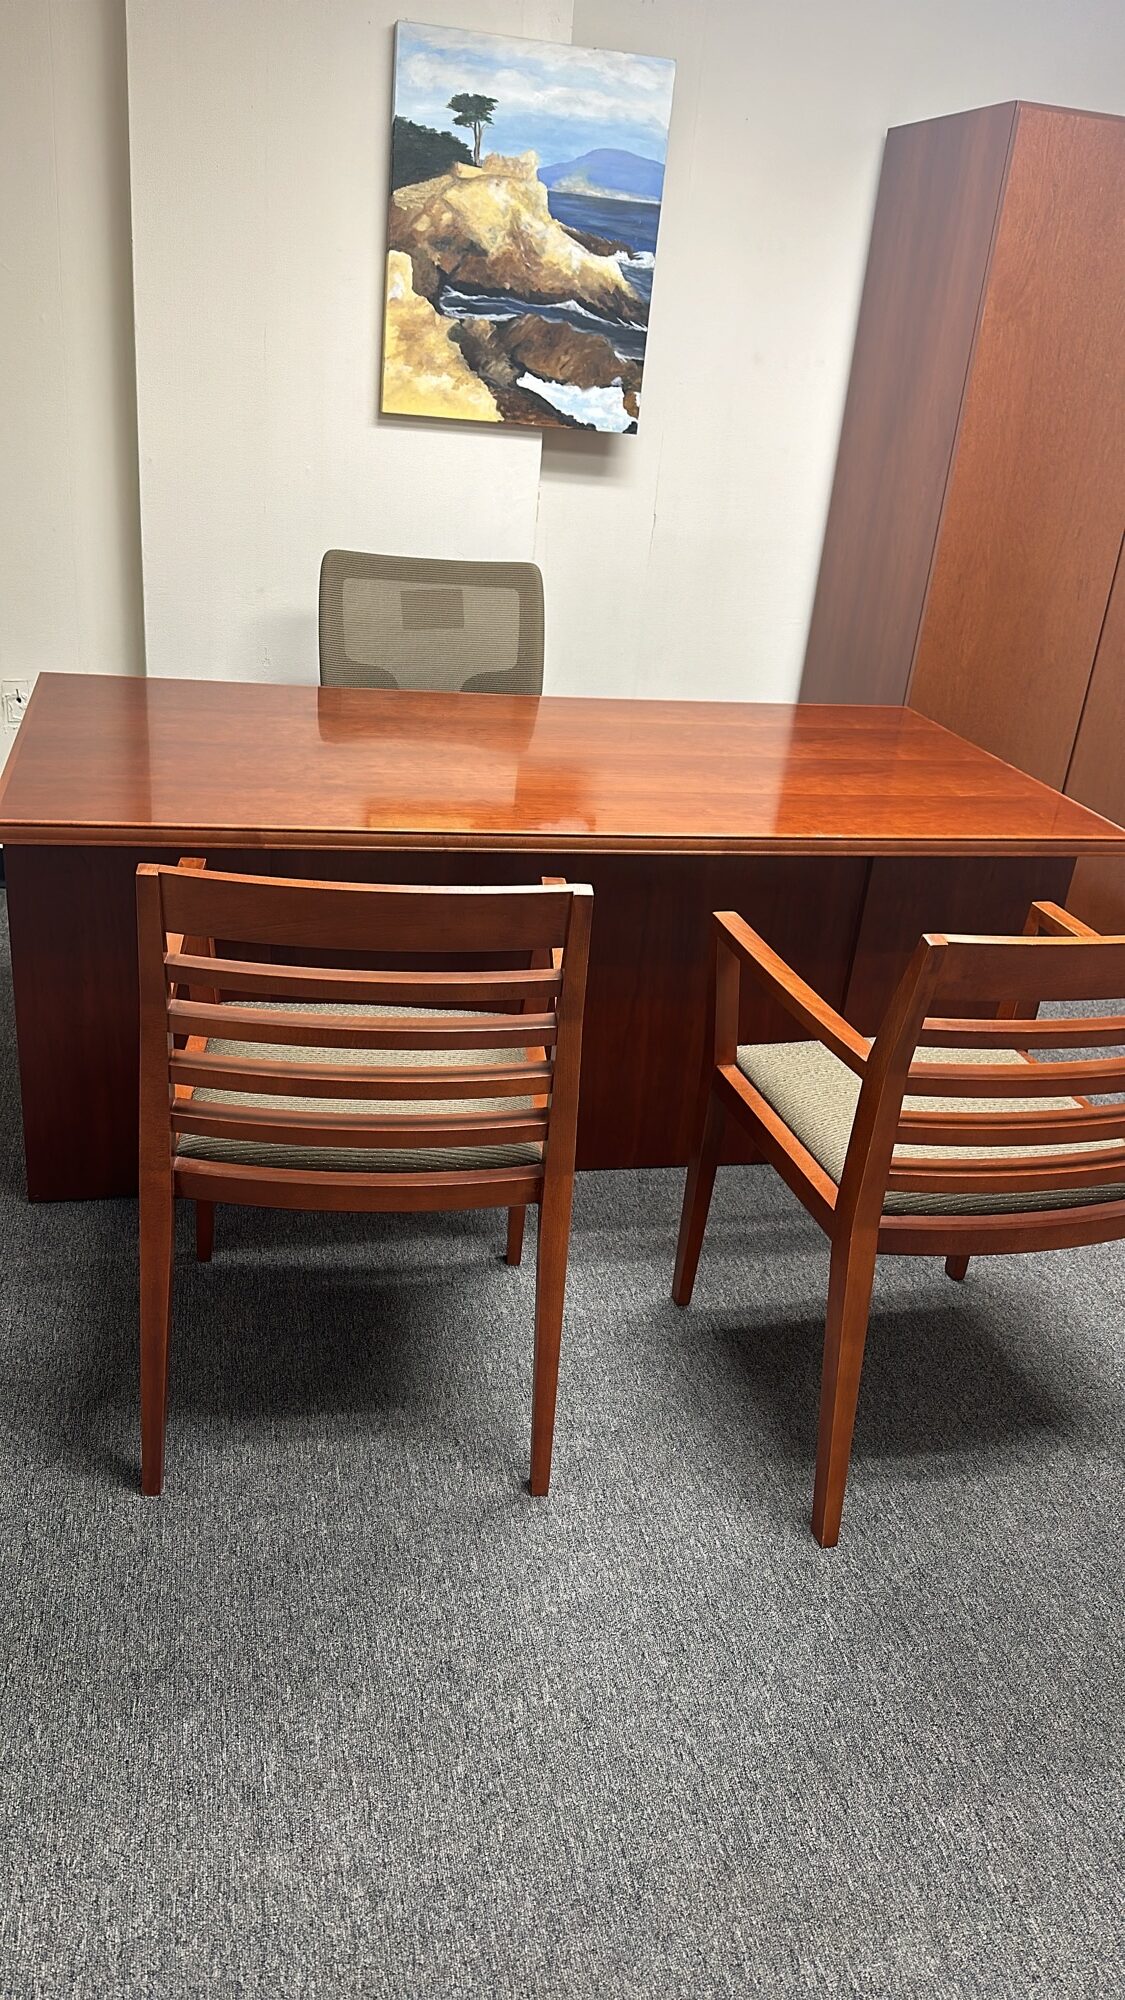 Used Wood Veneer Executive Desk with chairs